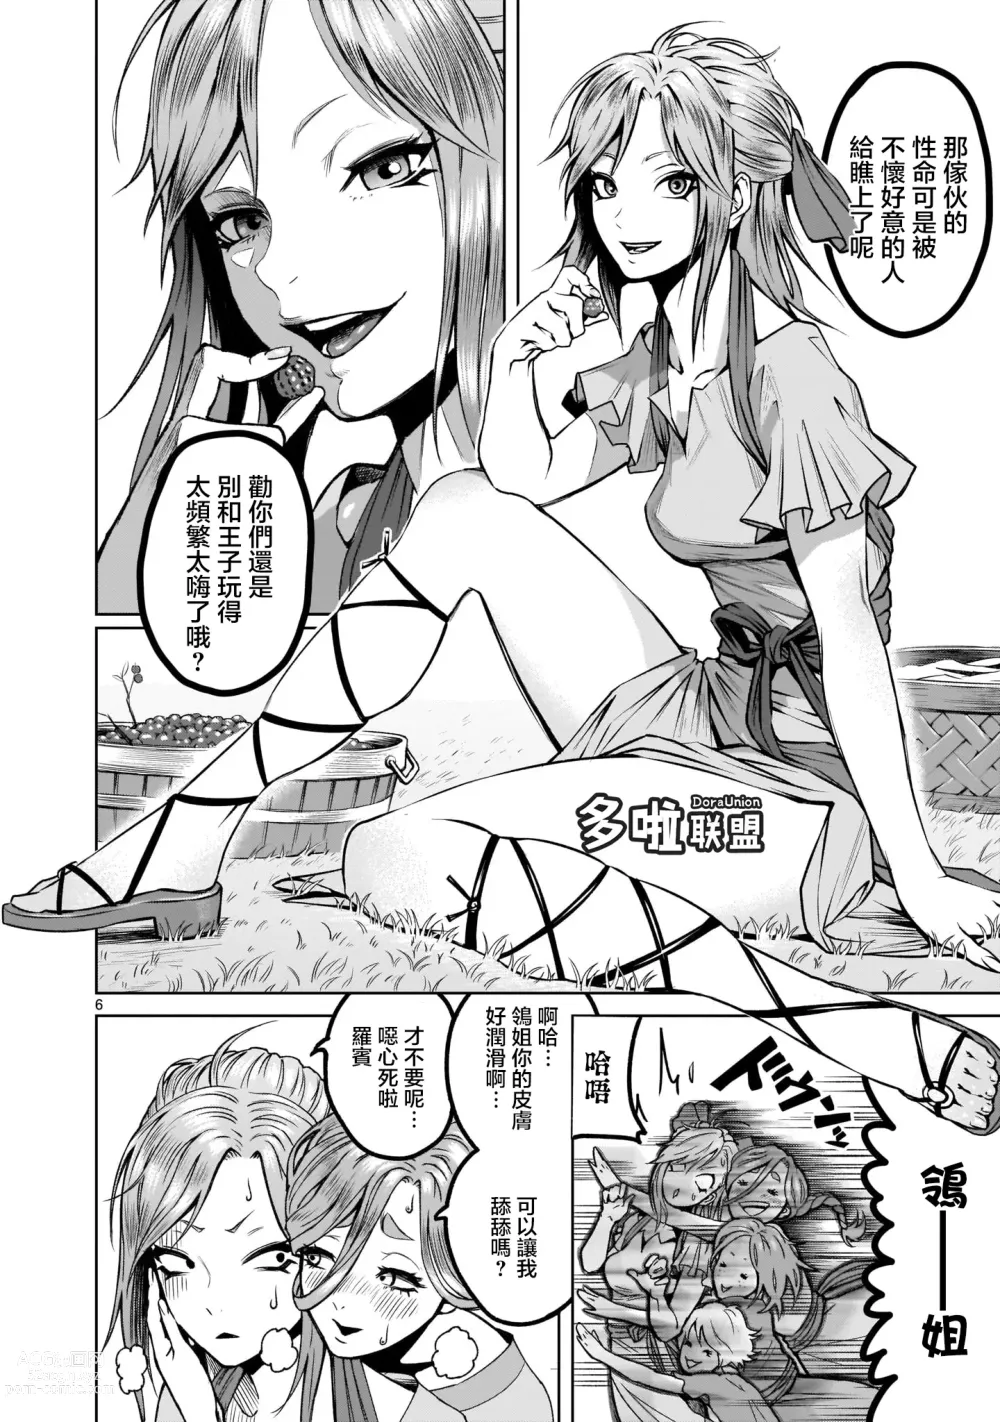 Page 4 of doujinshi 蔷薇园传奇 01Chinese